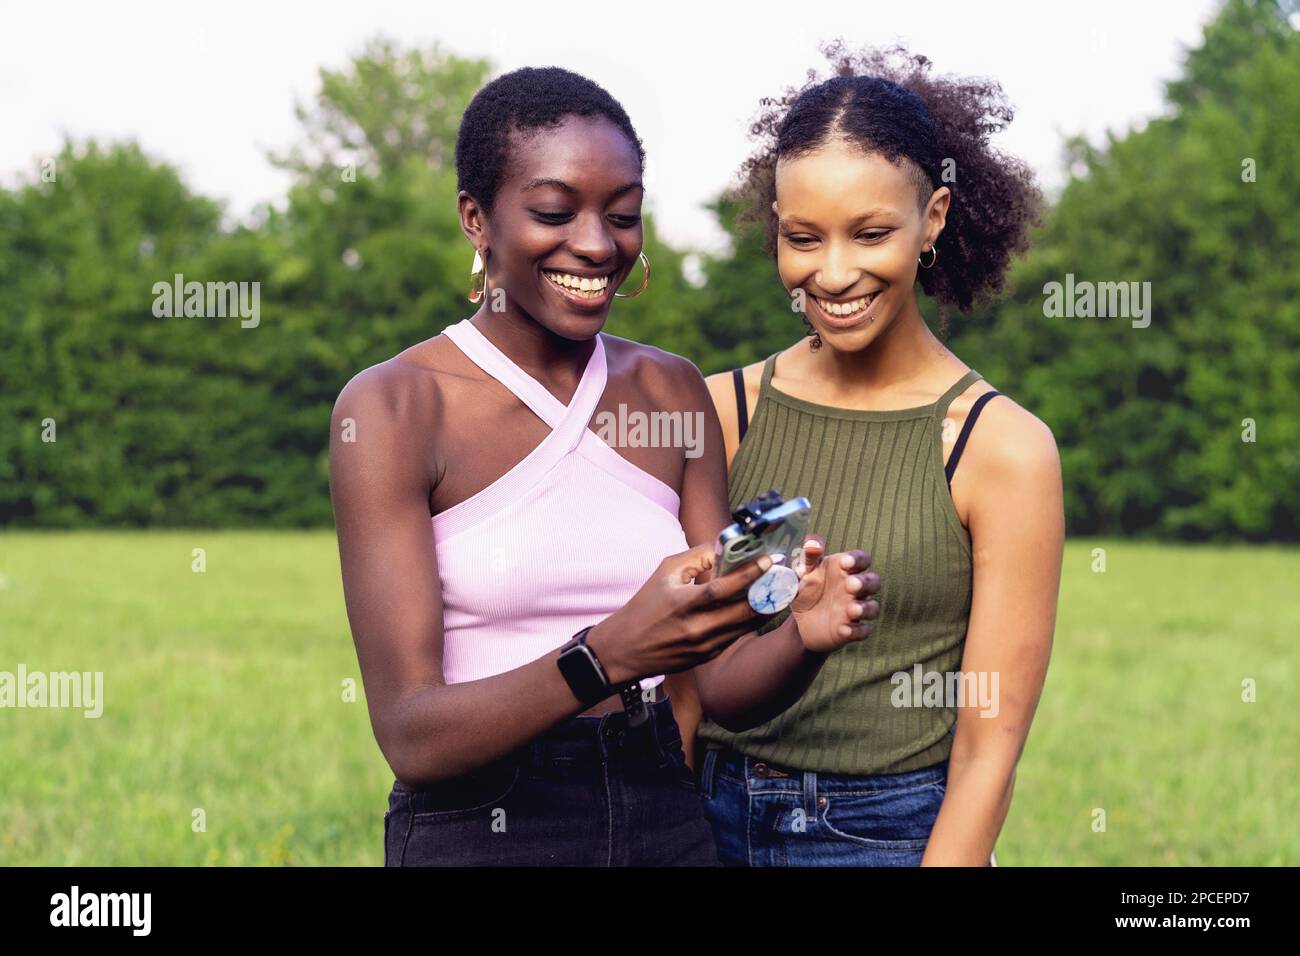 Two young women of color, one with curly long hair and the other with shaved mixed-race hair, enjoy themselves together outdoors in a public park. The Stock Photo